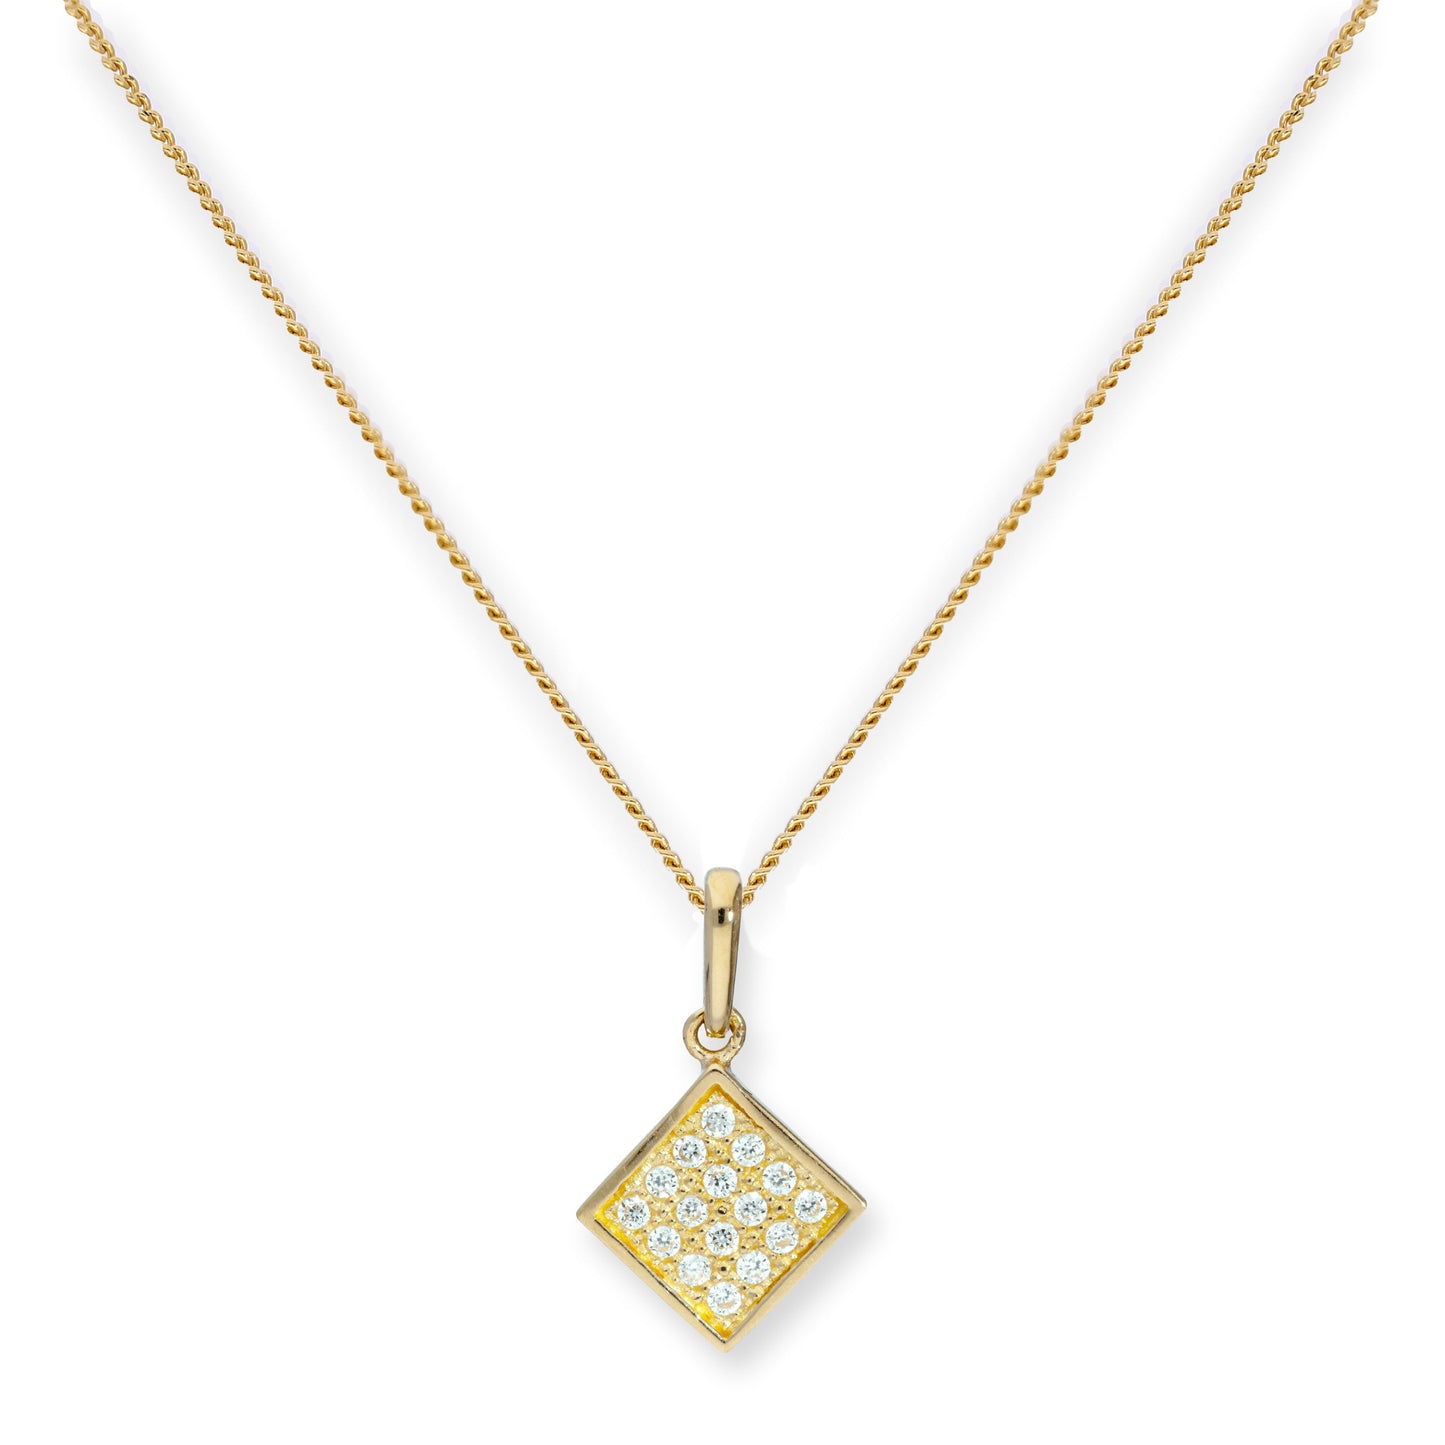 9ct Gold & Clear CZ Crystal Flat Square Pendant Necklace 16 - 20 Inches